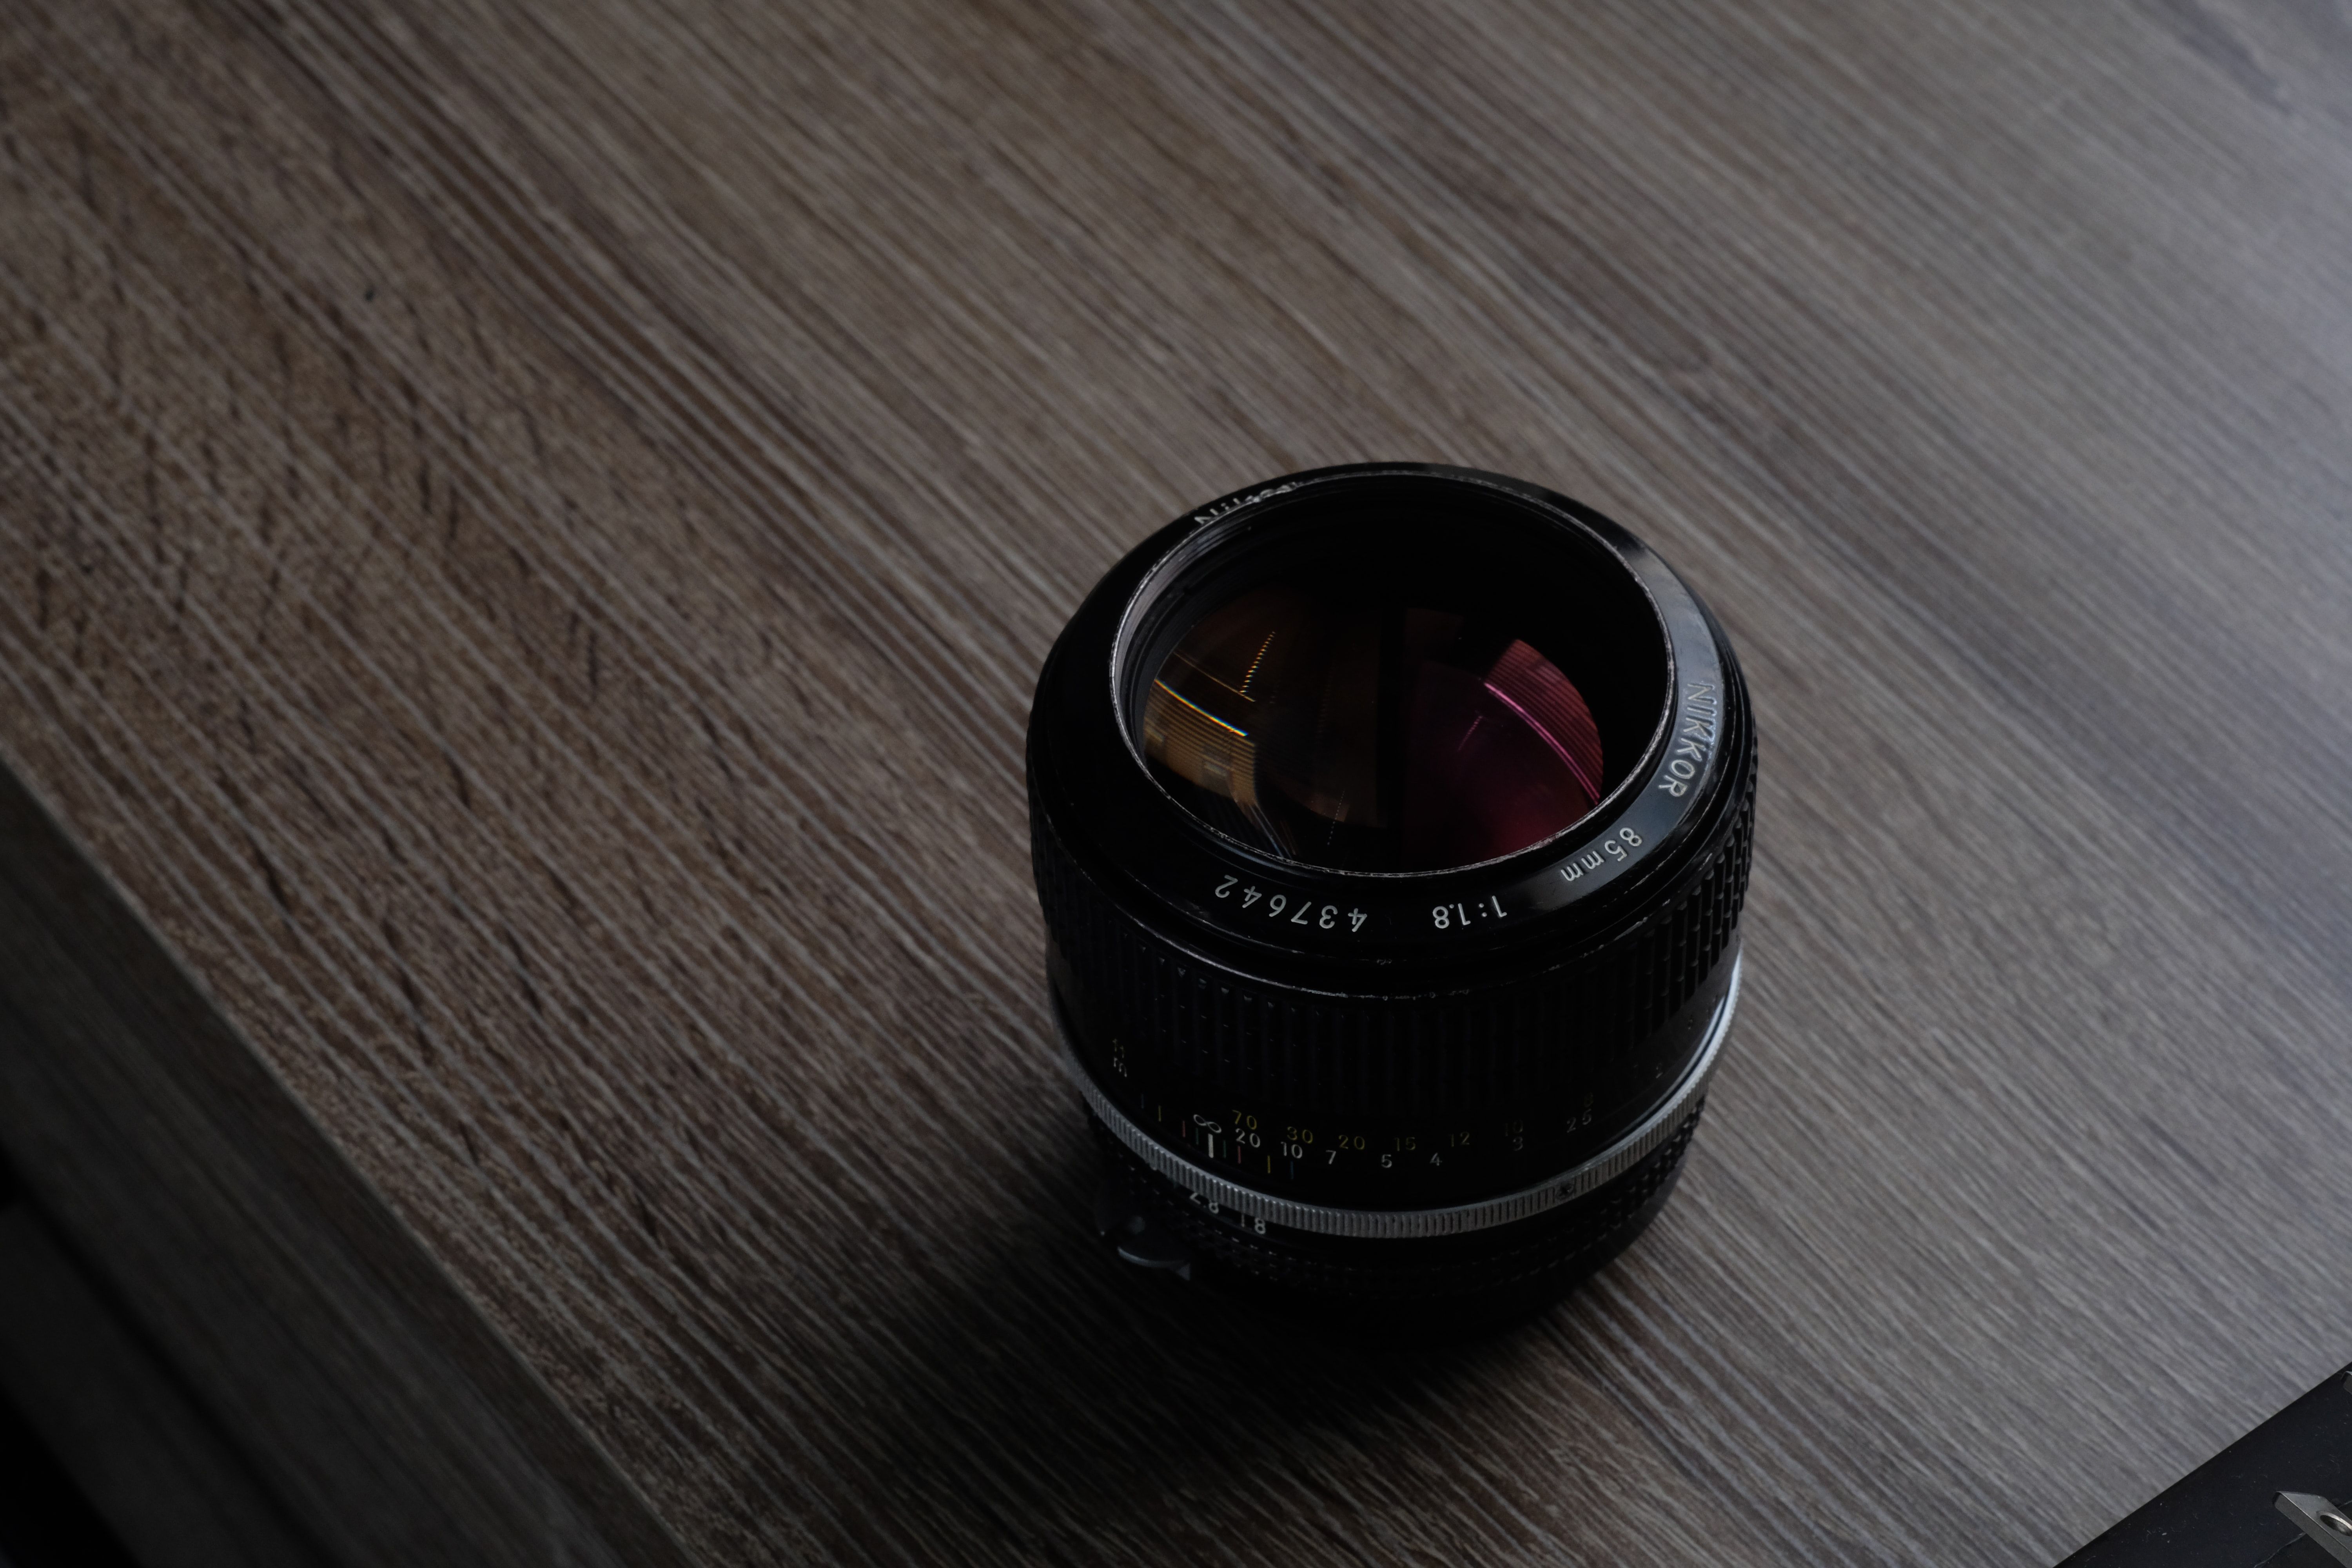 Prime lenses are perfect for lens whacking